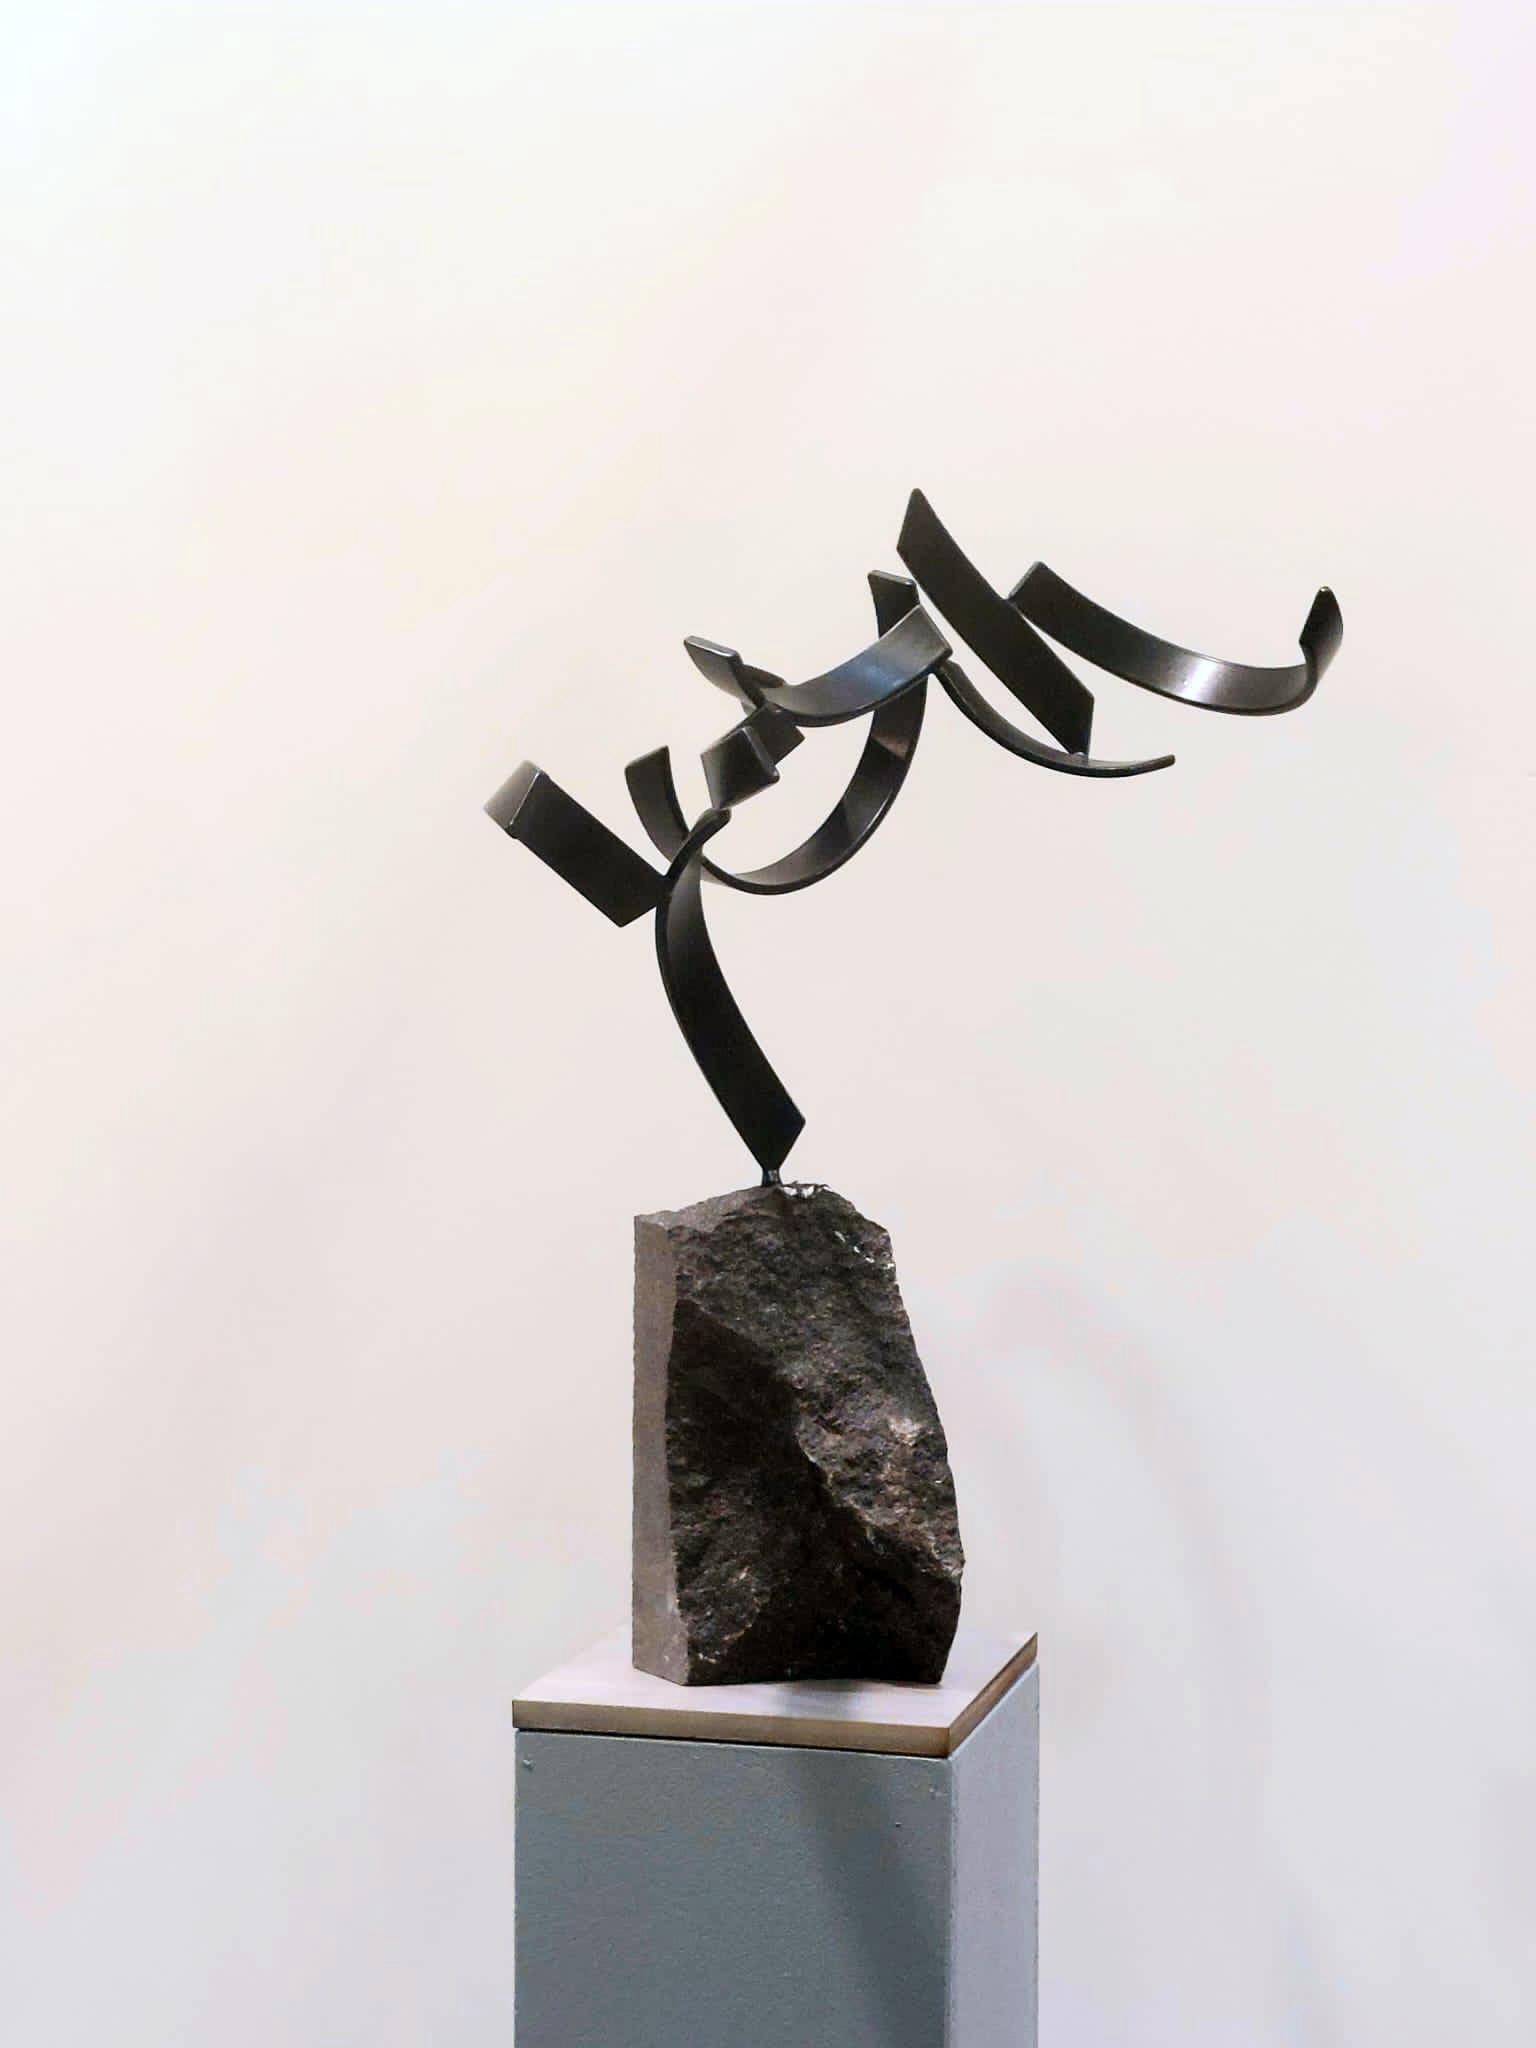 Aiming Up by Kuno Vollet Contemporary Steel Sculpture for indoor or outdoor For Sale 2